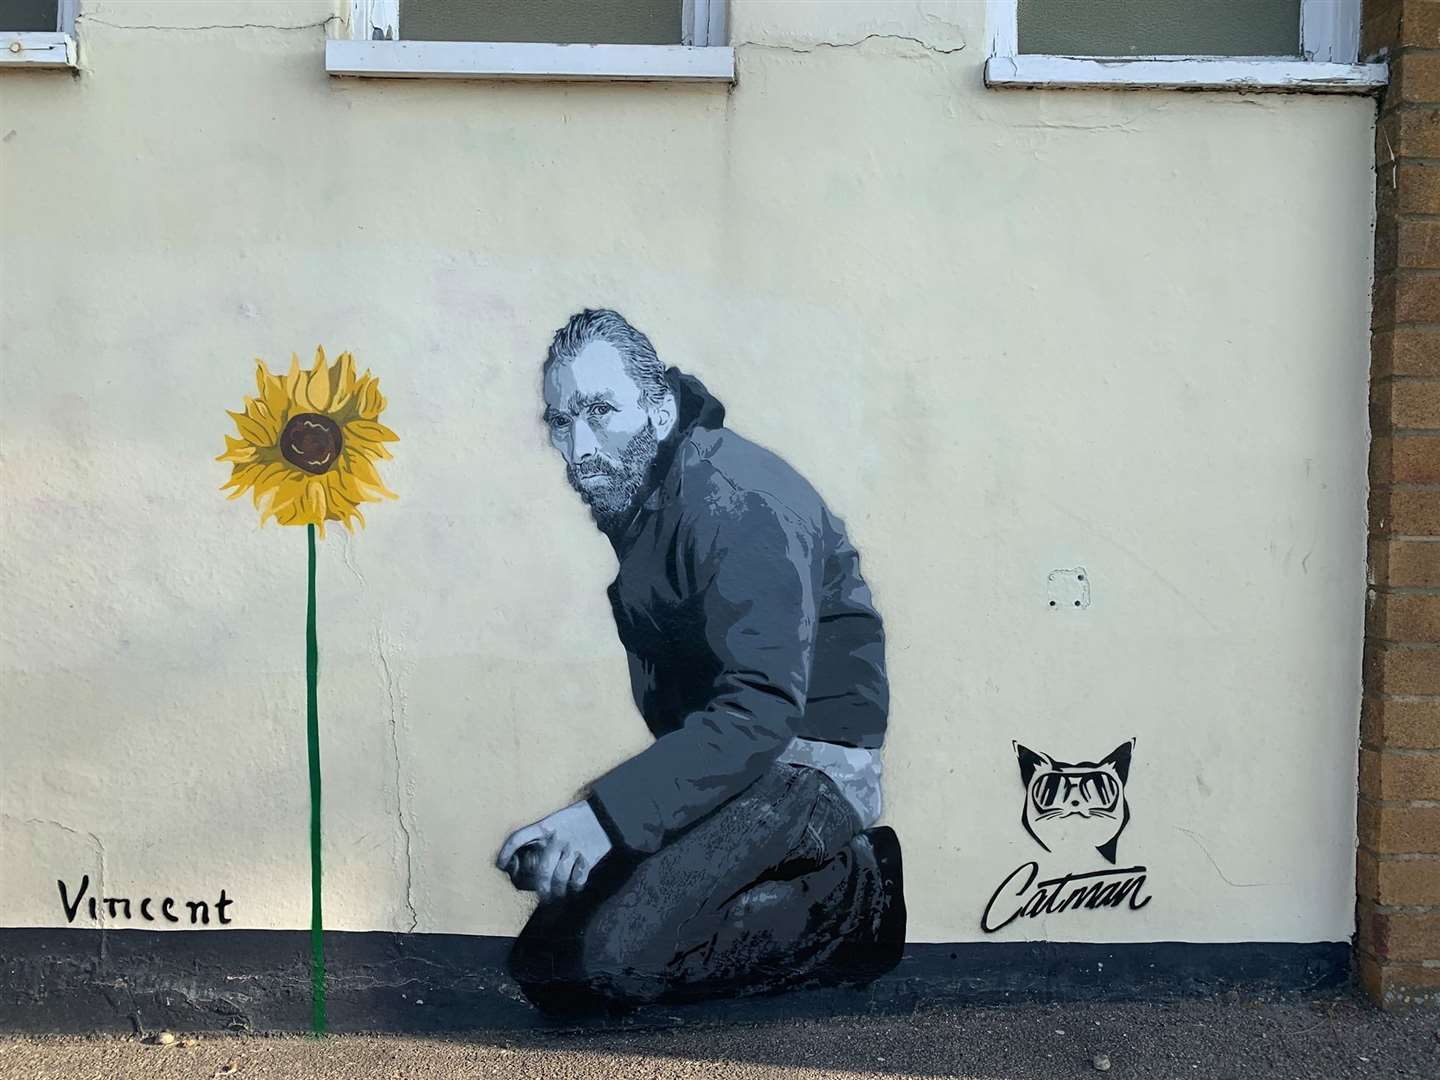 Catman has sprayed his latest artwork 'Vincent' on the side of a block of loos by Whitstable Harbour. PIcture: Catman/Facebook